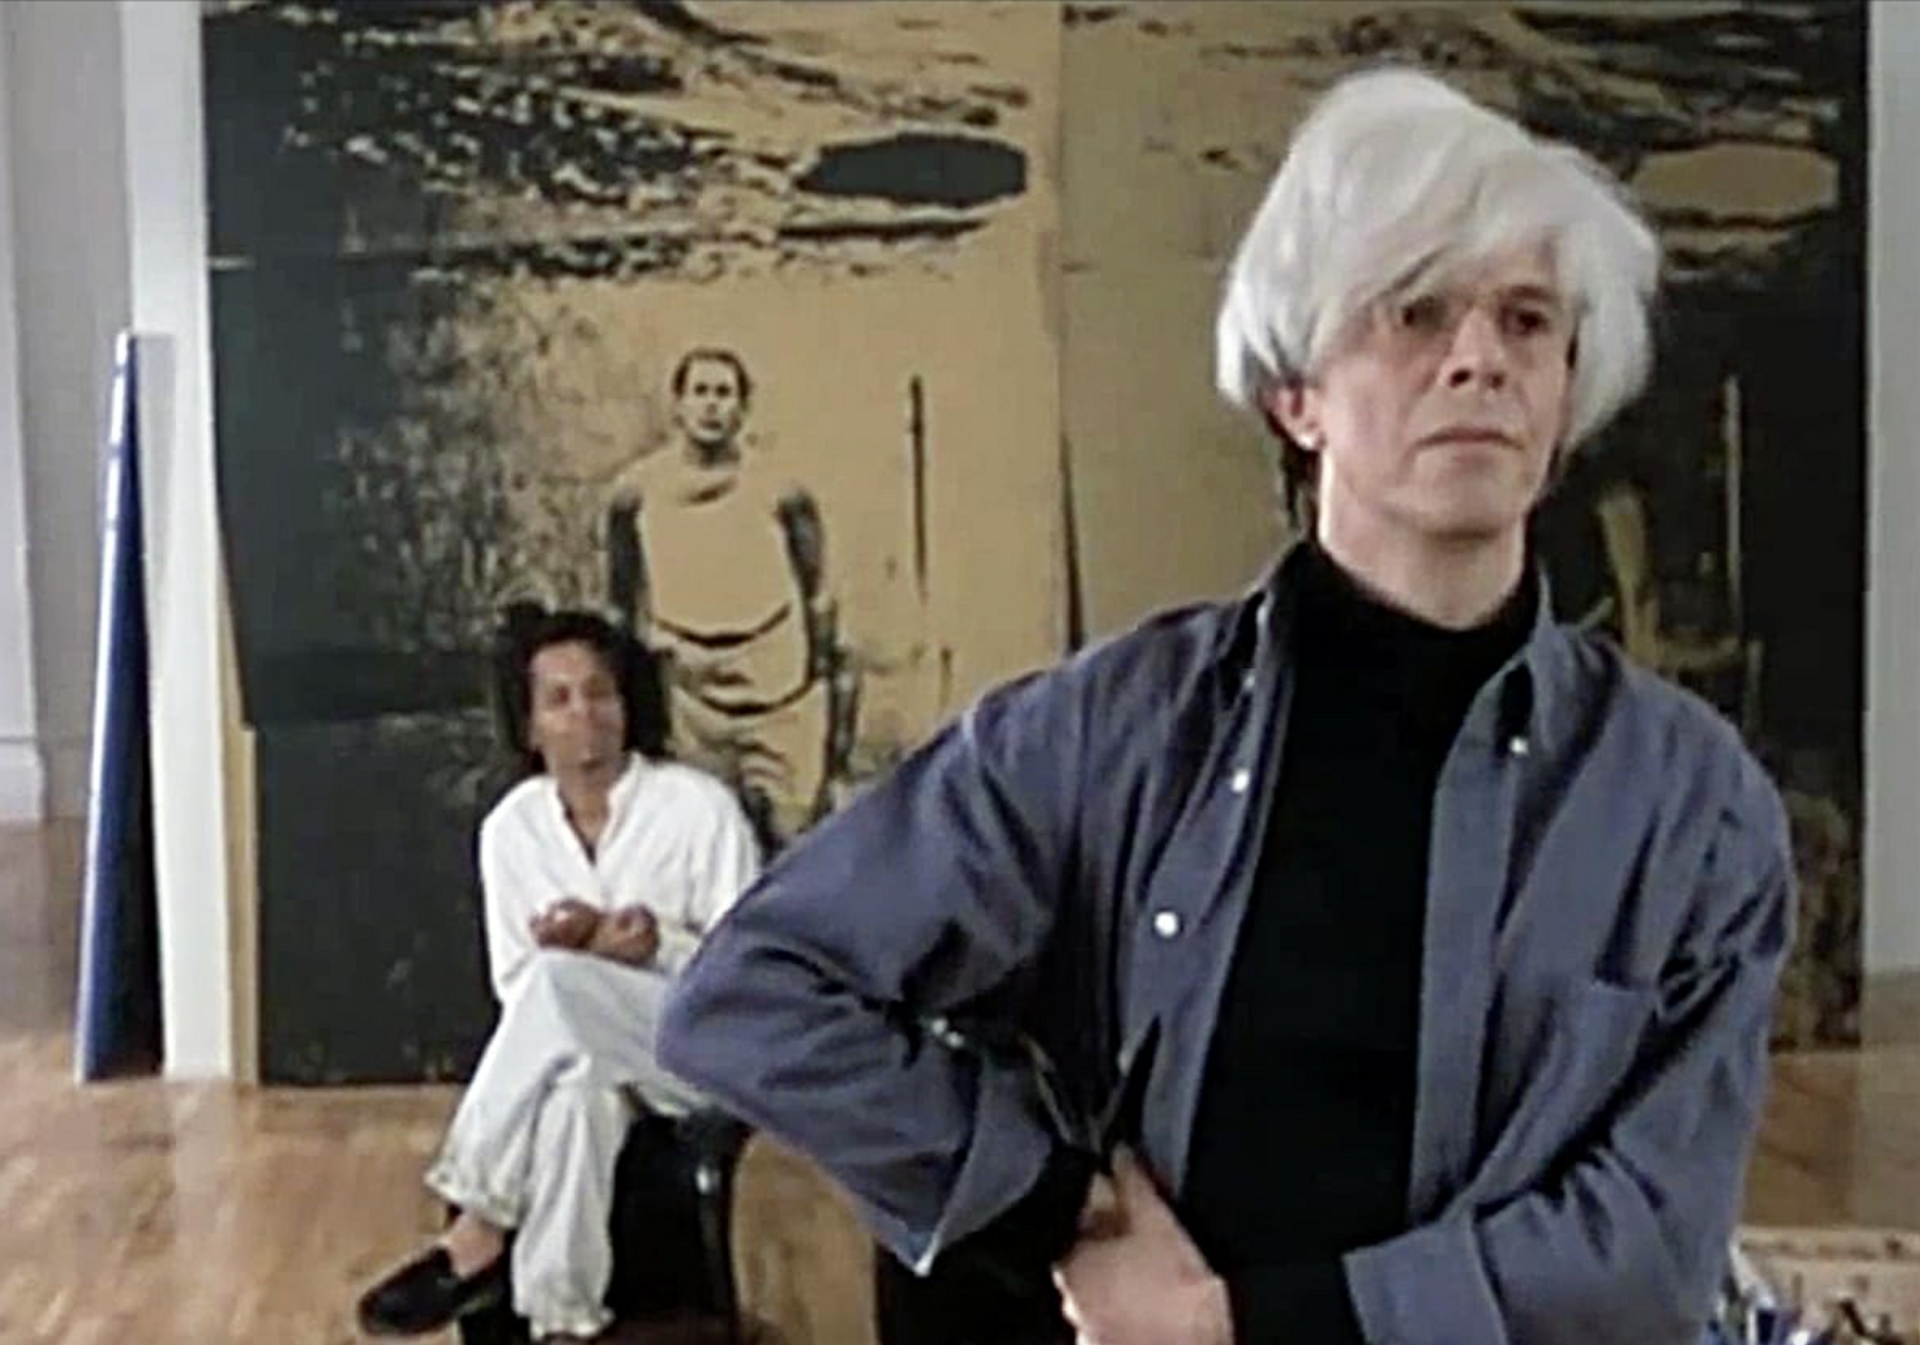 A screenshot of the film Basquiat by Julian Schnabel. It shows Andy Warhol, played by David Bowie, with Jeffrey Wright as Basquiat in the background.